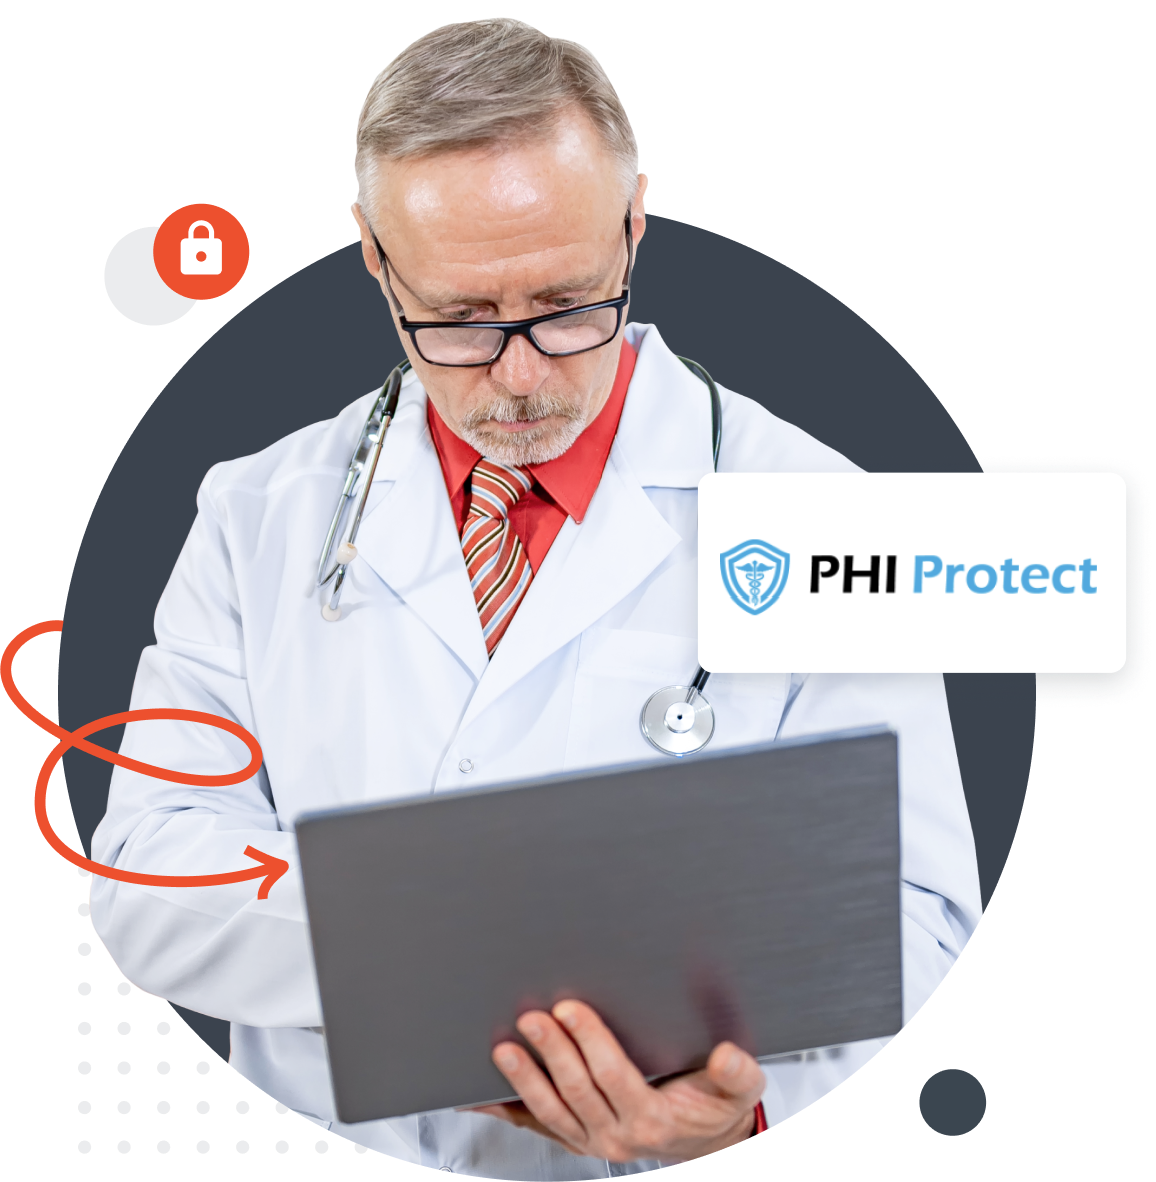 HIPAA Compliant Forms Trusted Devices